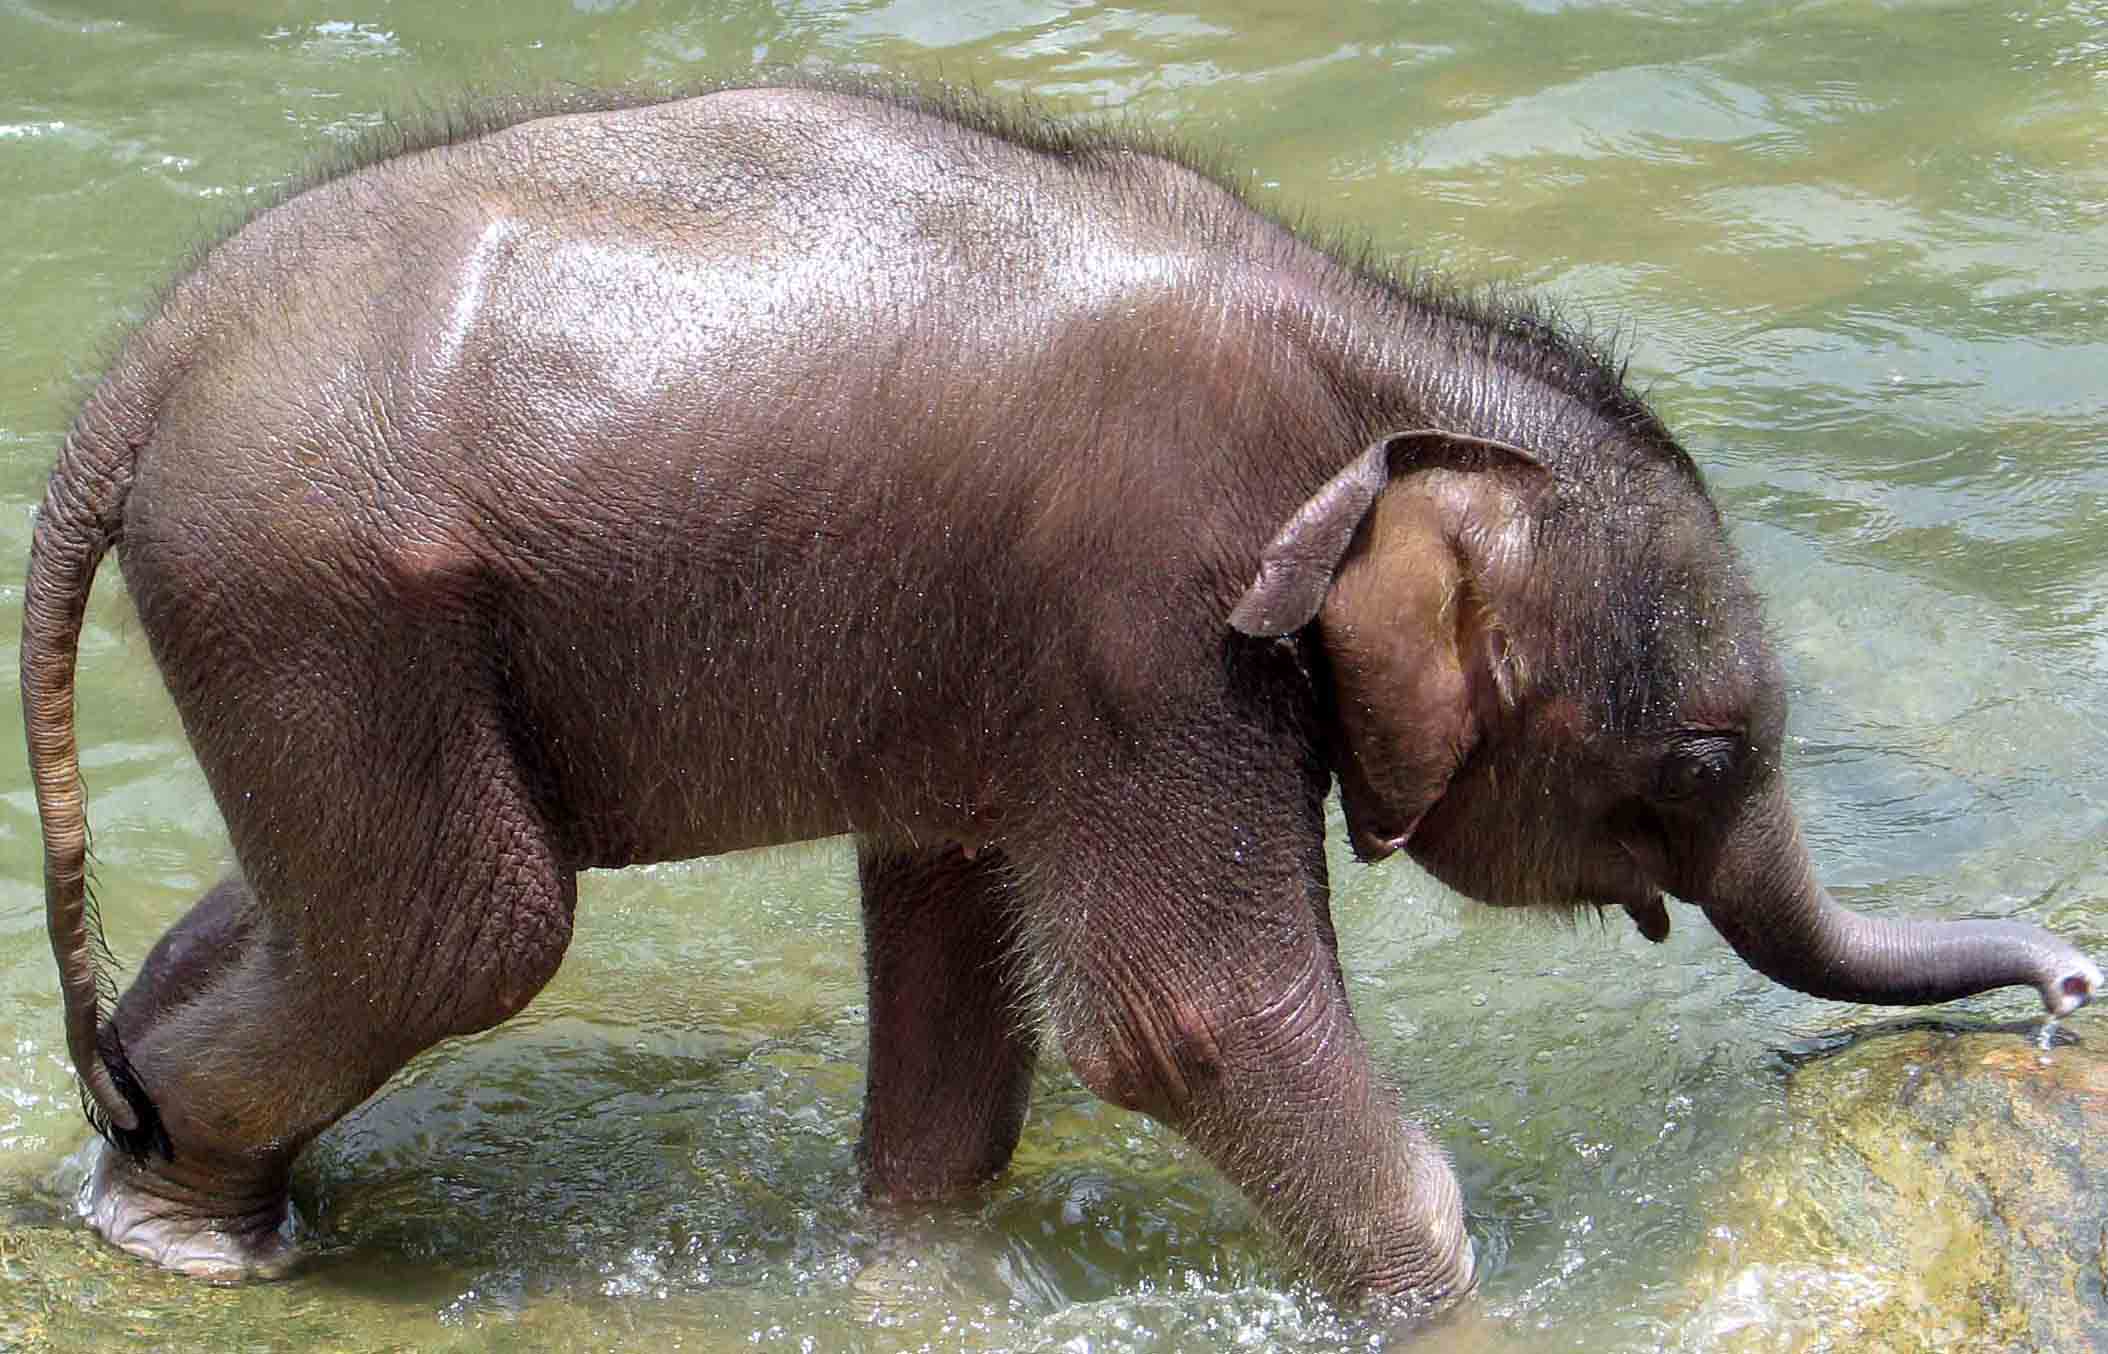 Baby Elephant Pictures Hd Wallpapers in Animals Imagescicom